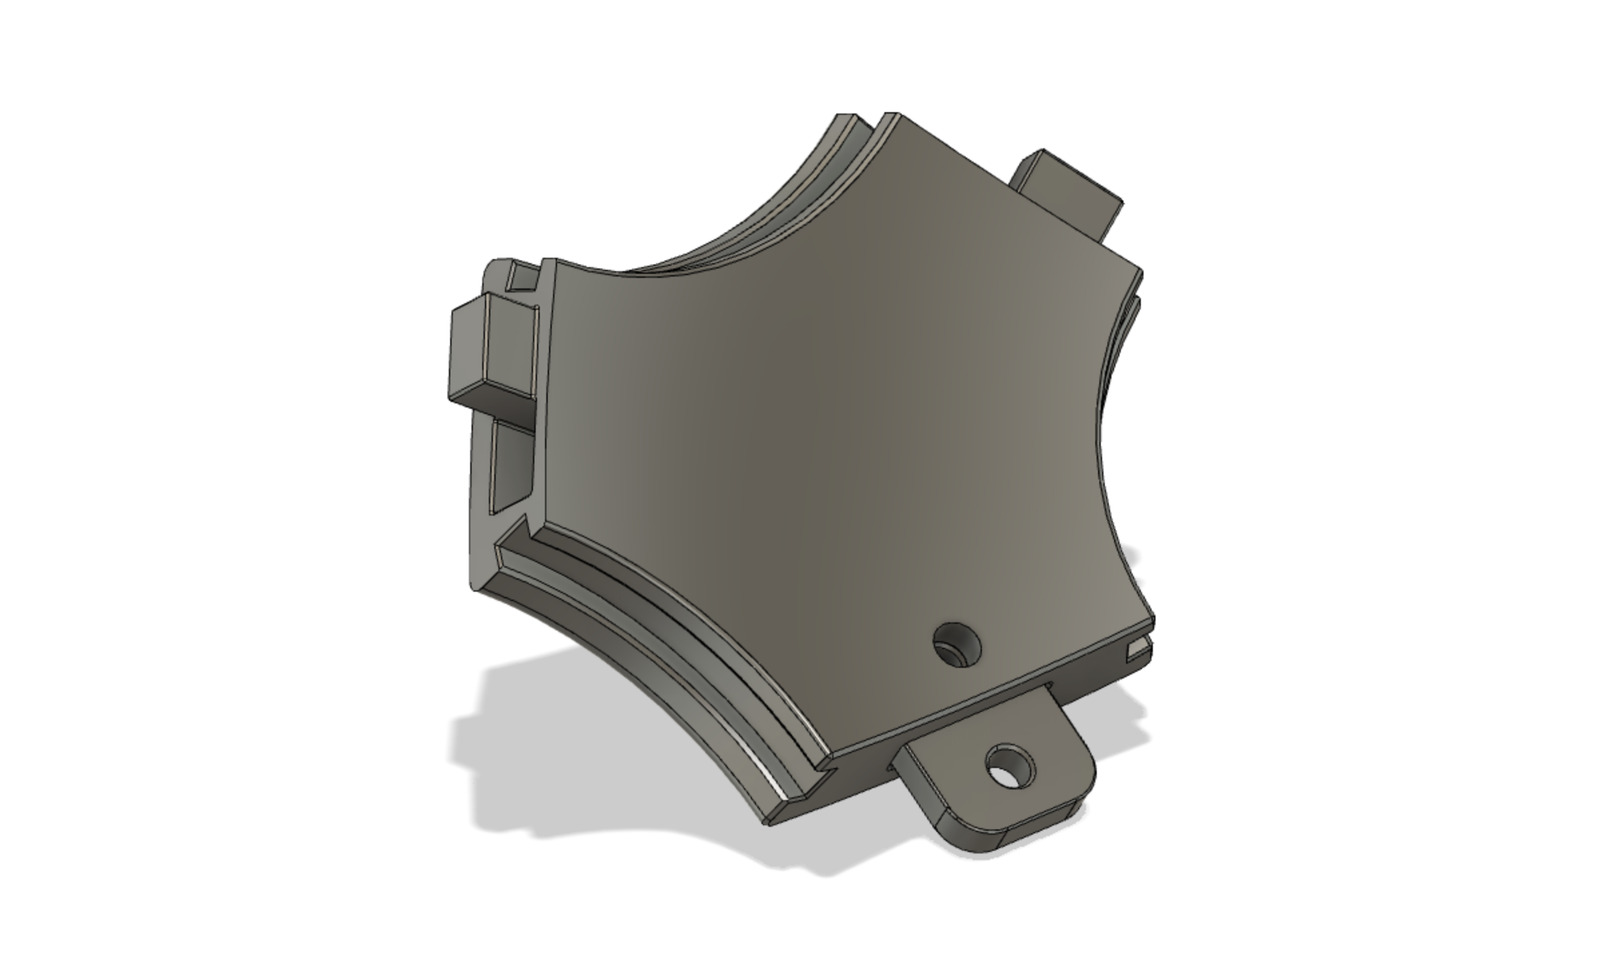 CAD screenshot of a single segment with screwed connector plate and friction-fit nose